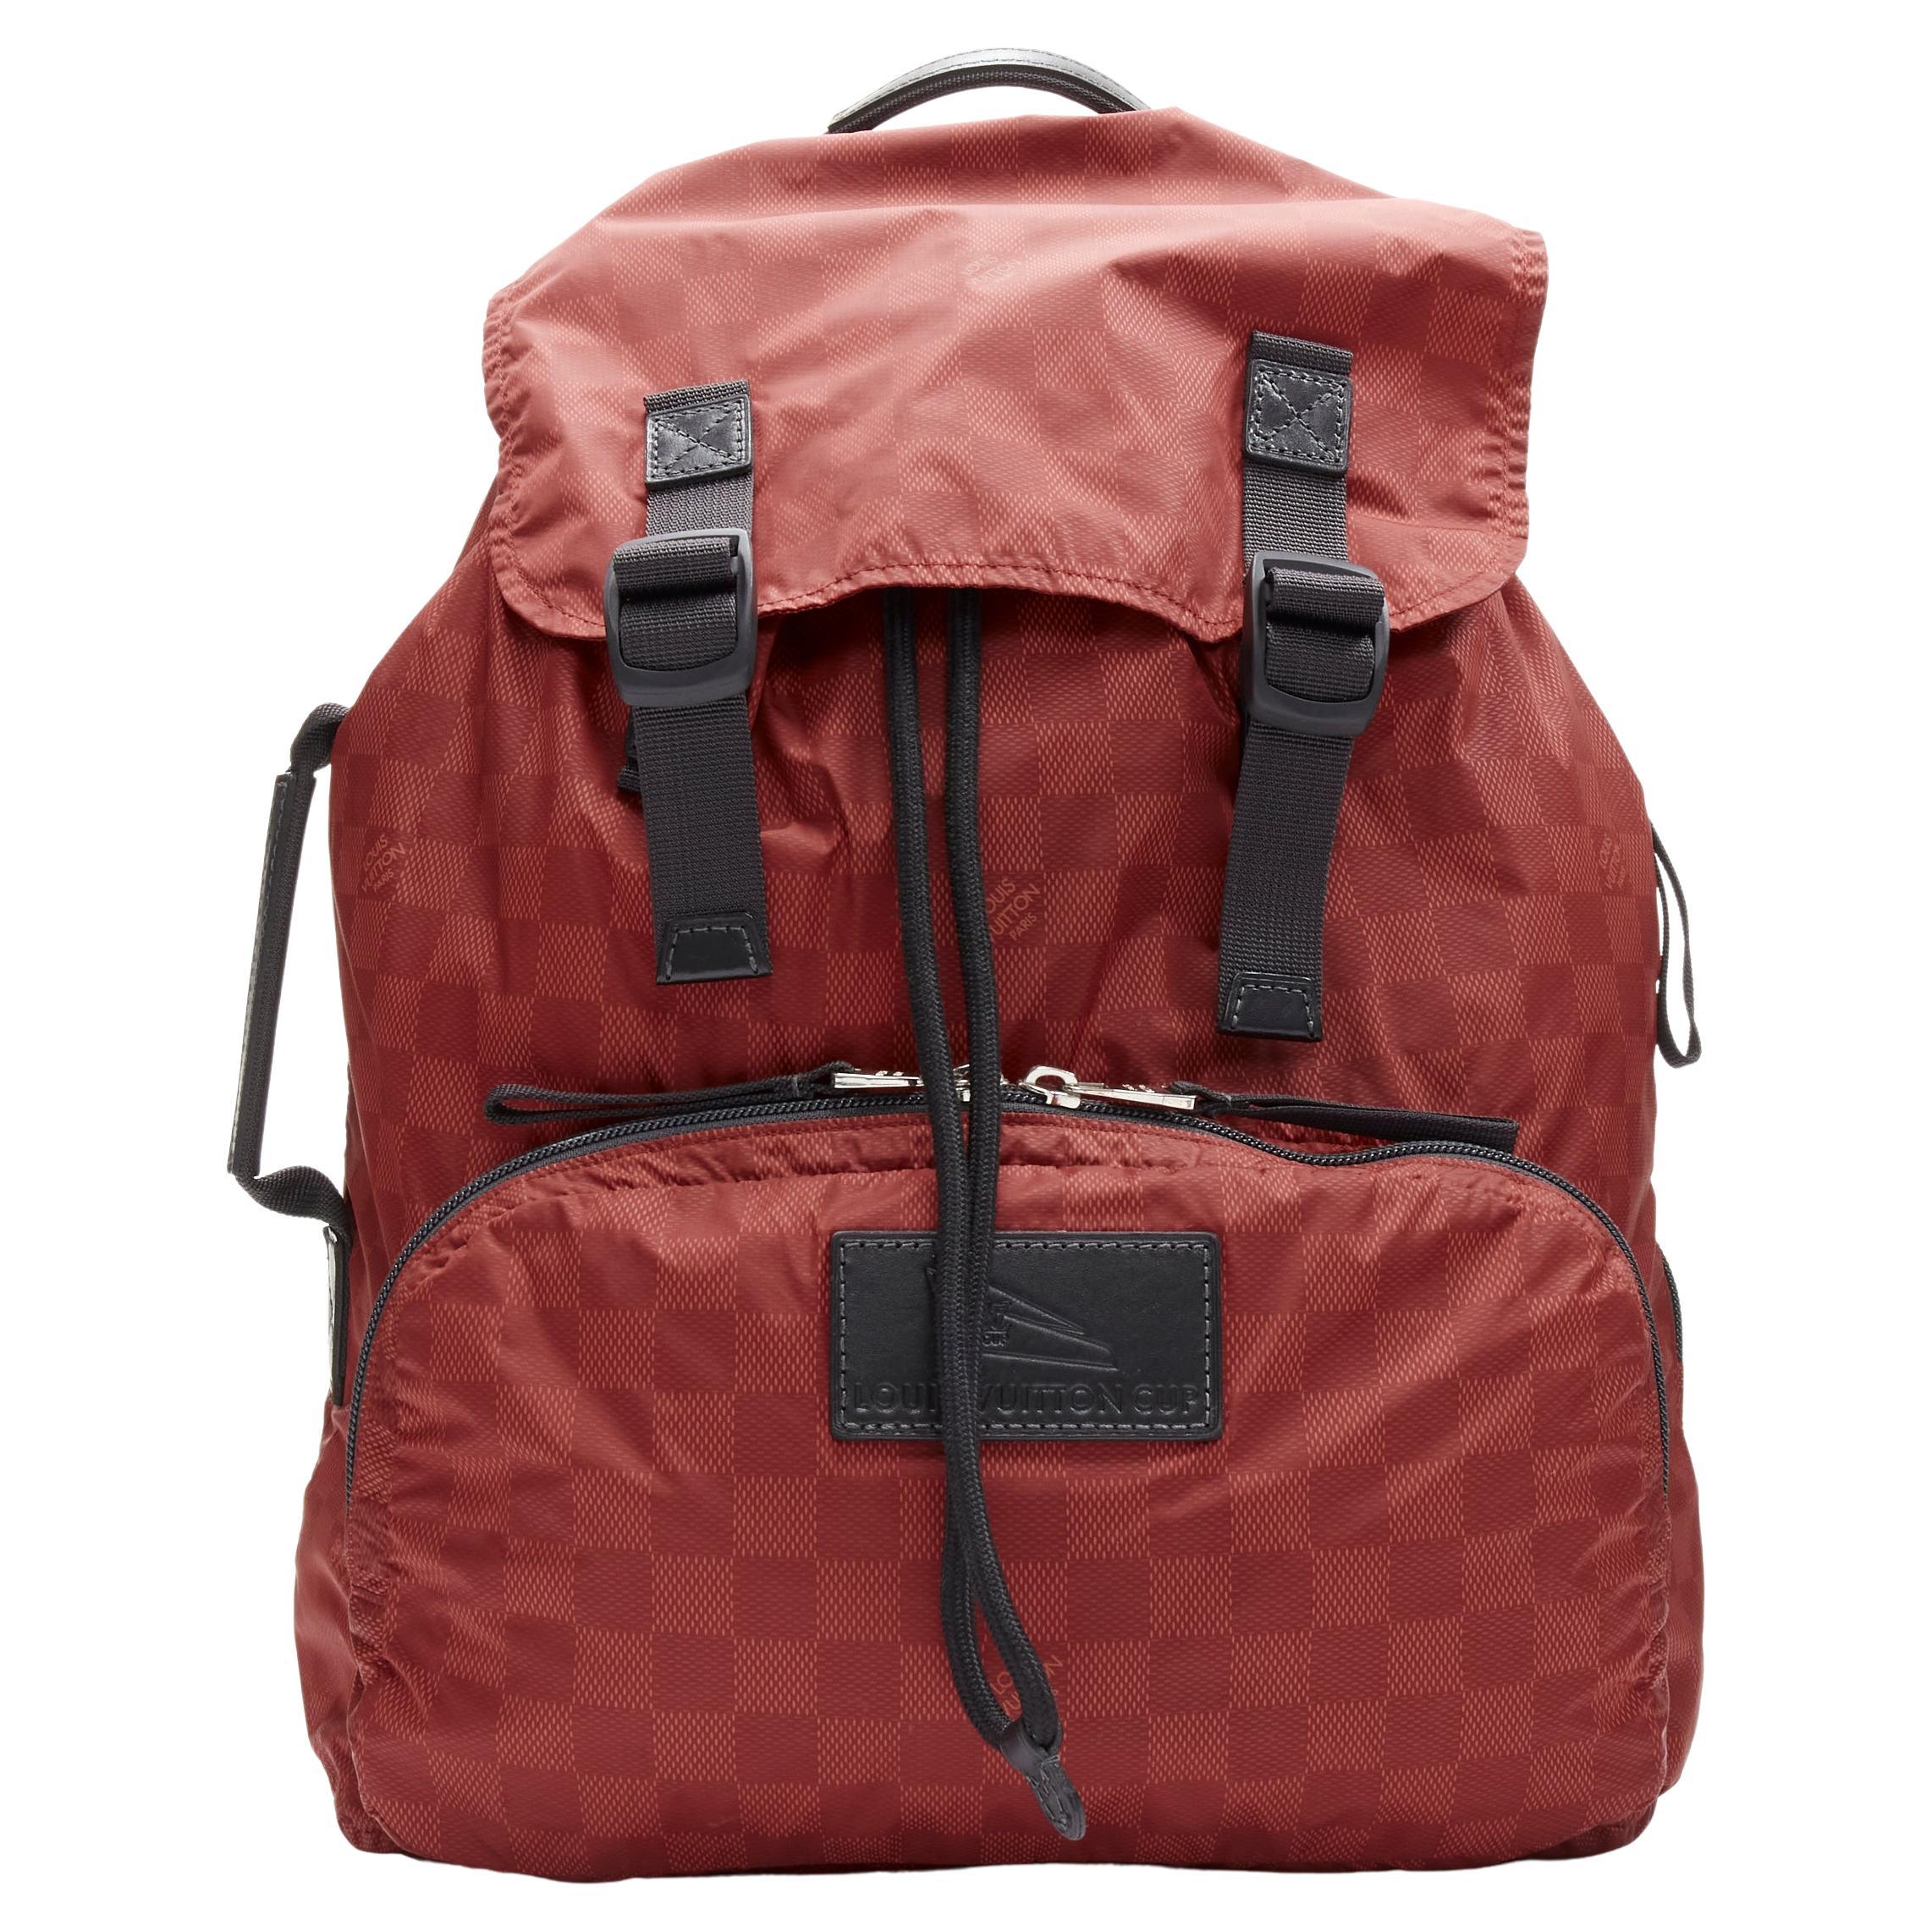 LOUIS VUITTON Cup 2012 red LV Damier nylon foldable backpack For Sale